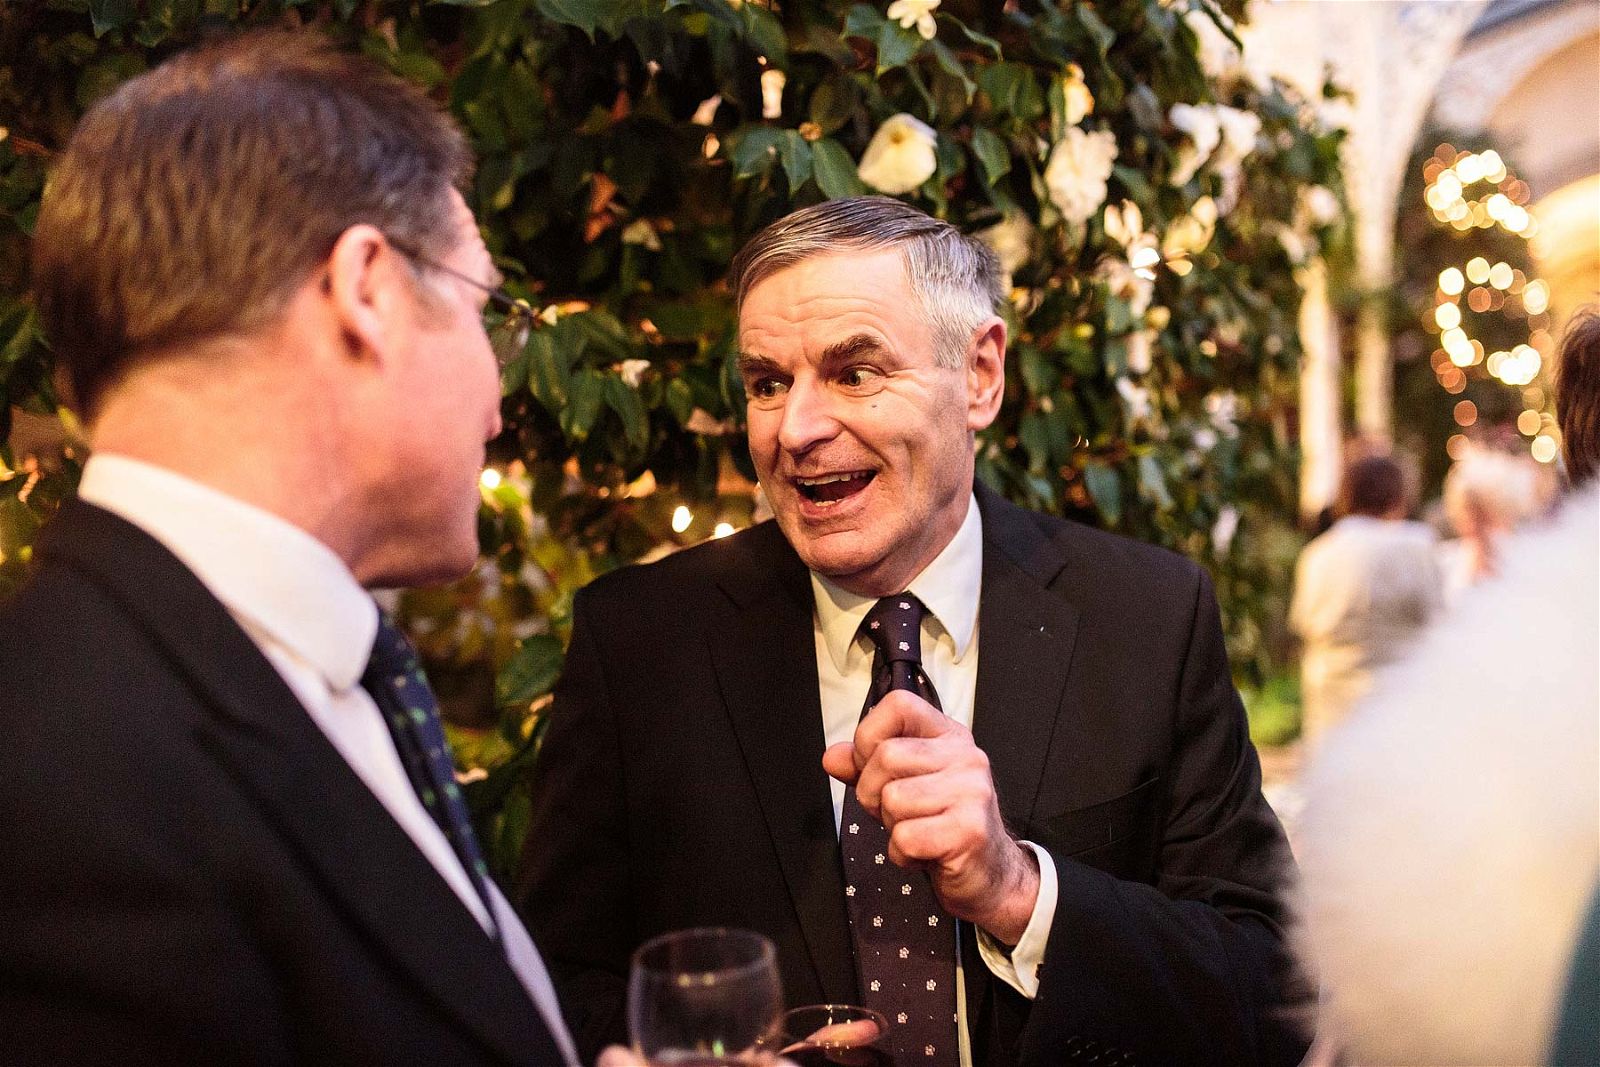 Candid photos as the guests enjoy the drinks reception at Sandon Hall in Stafford by Documentary Wedding Photographer Stuart James